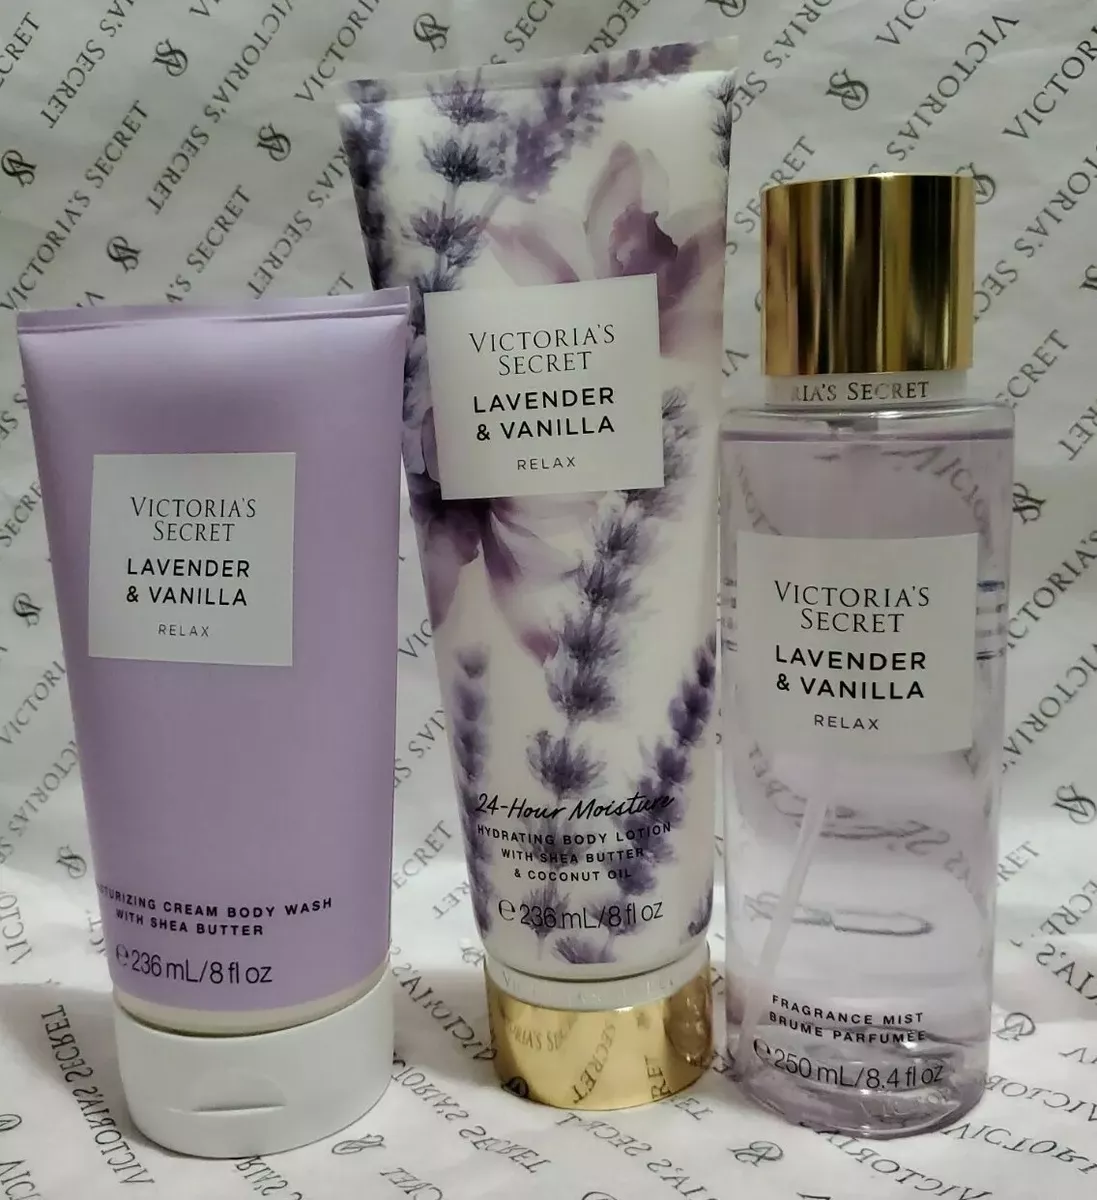 Lavender + Vanilla Fragrance Oil  Clean Candle, Soap, and Lotion Fragrance  Oil